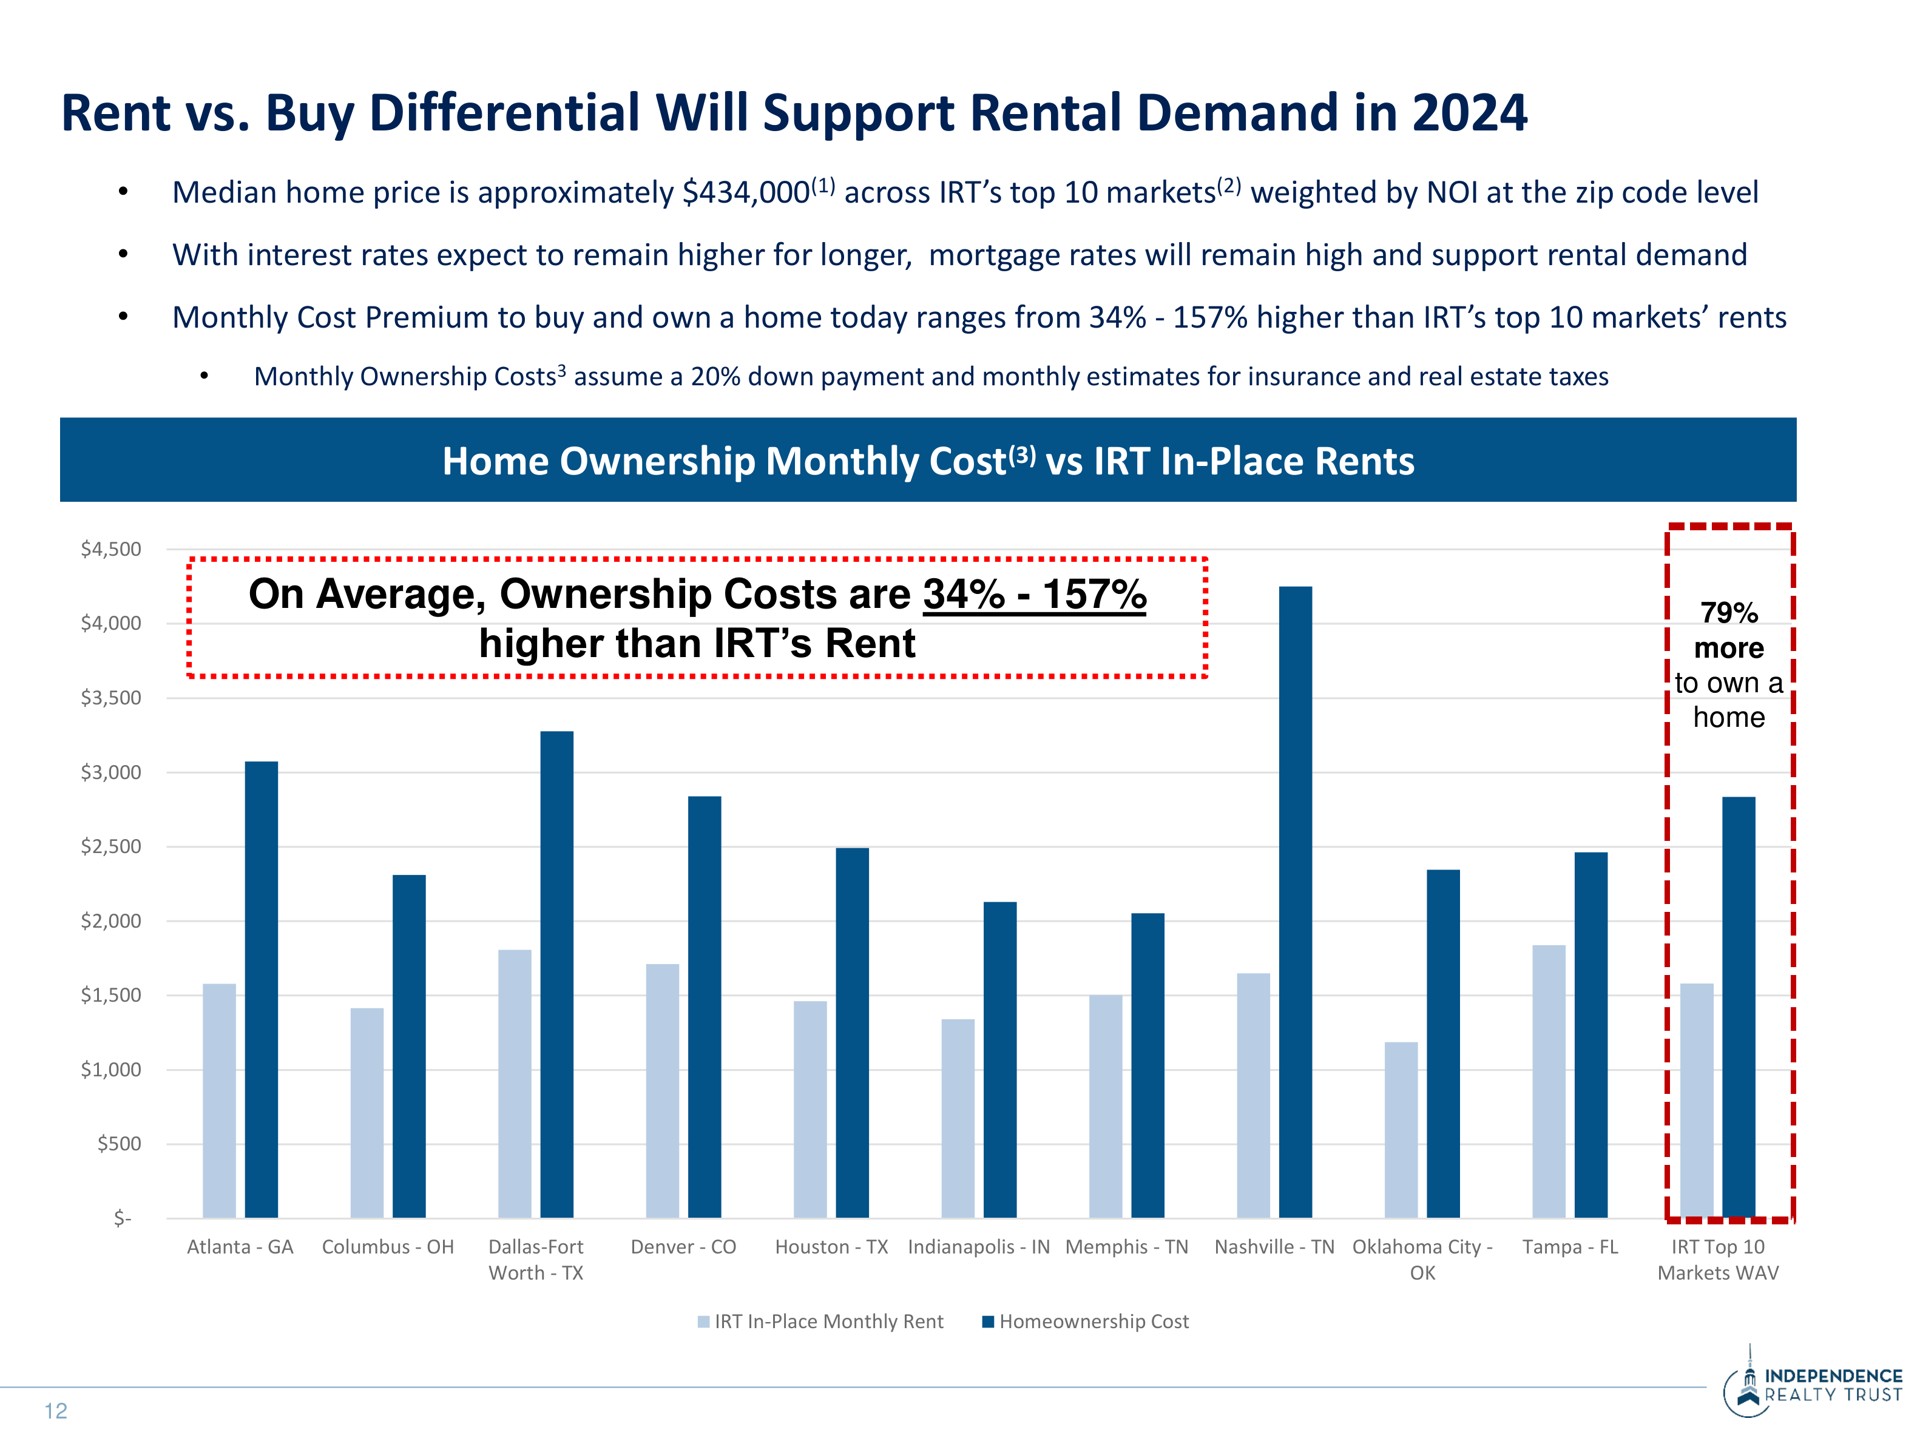 rent buy differential will support rental demand in home ownership monthly cost in place rents on average ownership costs are higher than rent median price is approximately across top markets weighted by at the zip code level i i i more | Independence Realty Trust